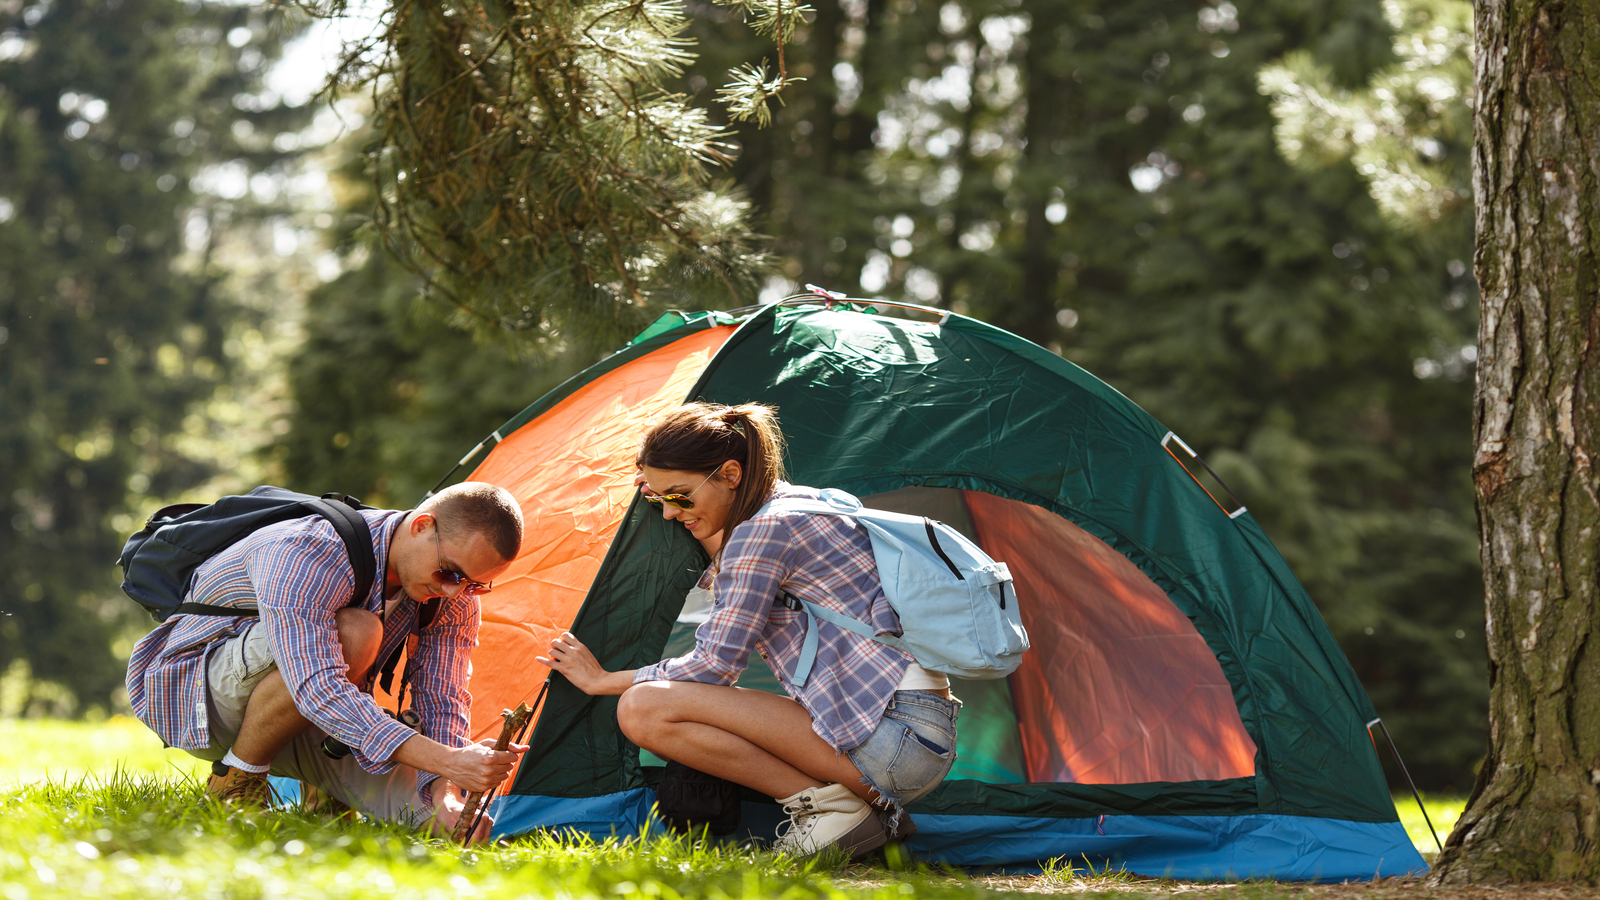 <p>Your top priority for any camping road trip should be your tent. Why?</p>  <p>Because this is your home away from home, and nobody likes staying in an uncomfortable home that doesn’t even allow them to sleep properly.</p>  <p>Choose an easy-to-setup, durable, spacious tent that withstands California’s mountain winds, coastal fog, and desert heat.</p>  <p>Okay, with the tent sorted out, you need a good-quality sleeping bag, especially for those chilly nights. Look for one with a mesh pocket to keep your phones, headlamps, or other gear inside.</p>  <p>But along with the sleeping bag, remember the sleeping pad for extra comfort at campsites on rocky terrain.</p>